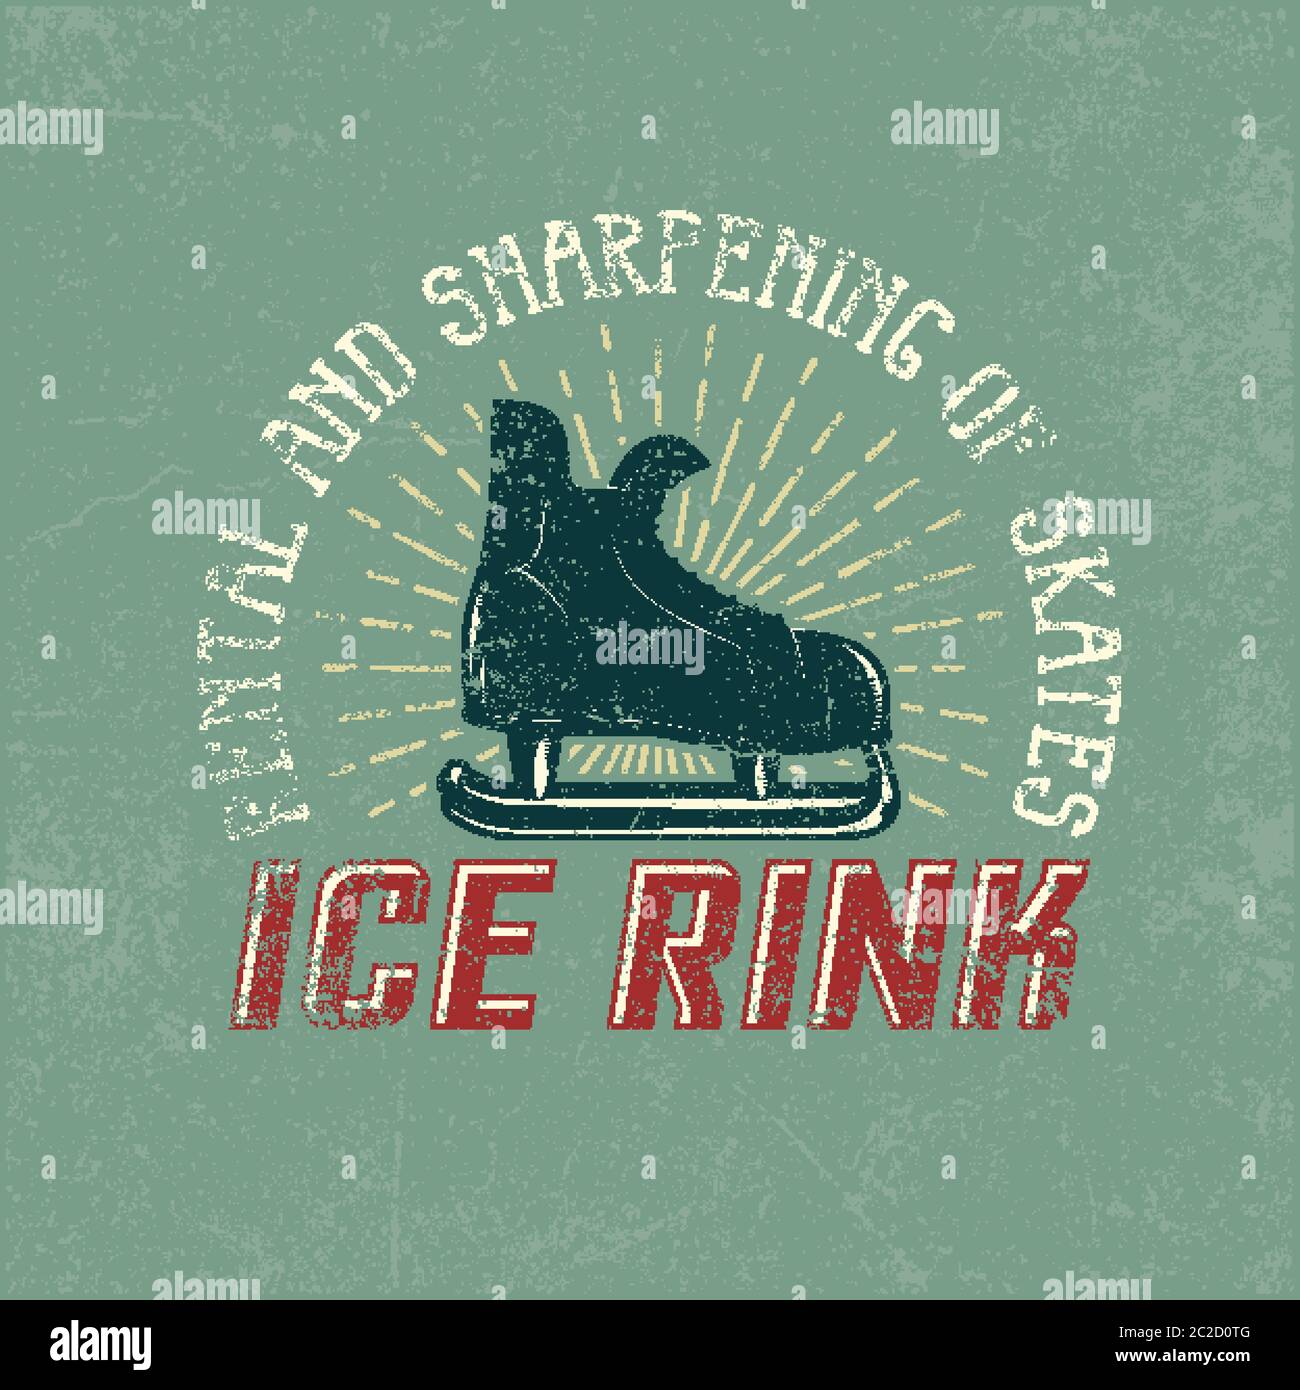 Vintage logo for ice rink Stock Vector